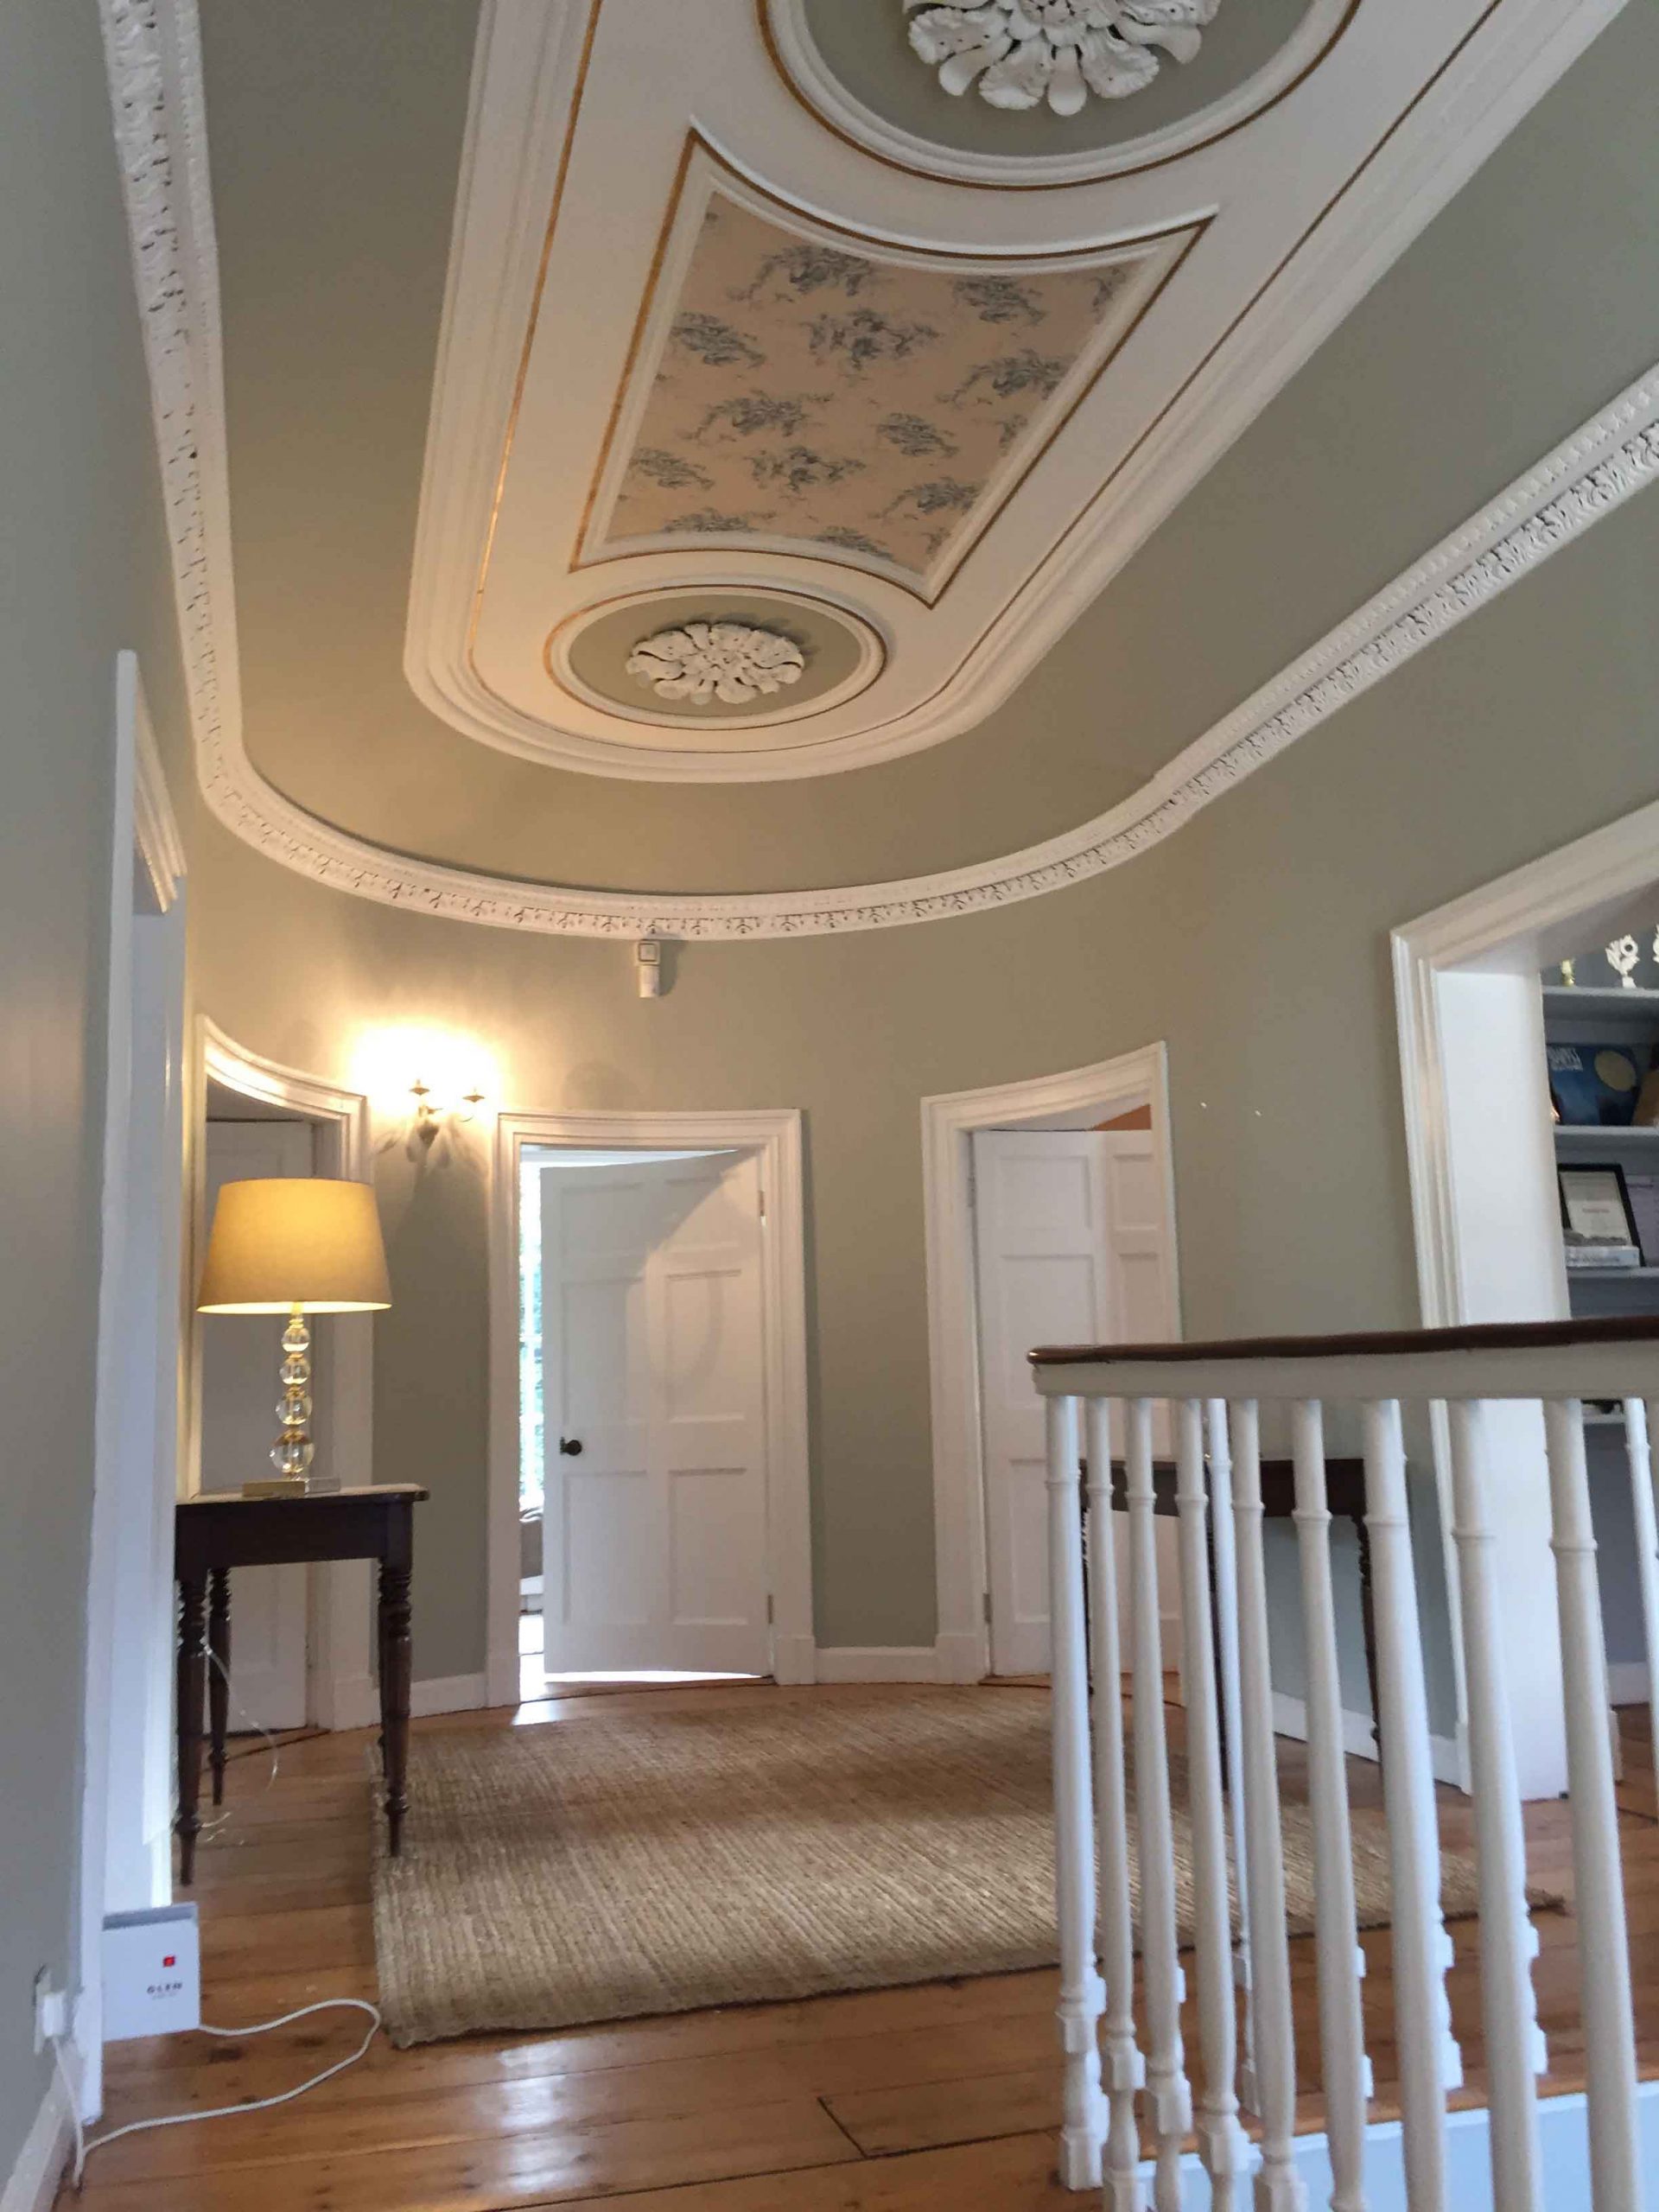 Hall stairs and landing restoration by professional period house restorers Impressions and Impressions in Dublin